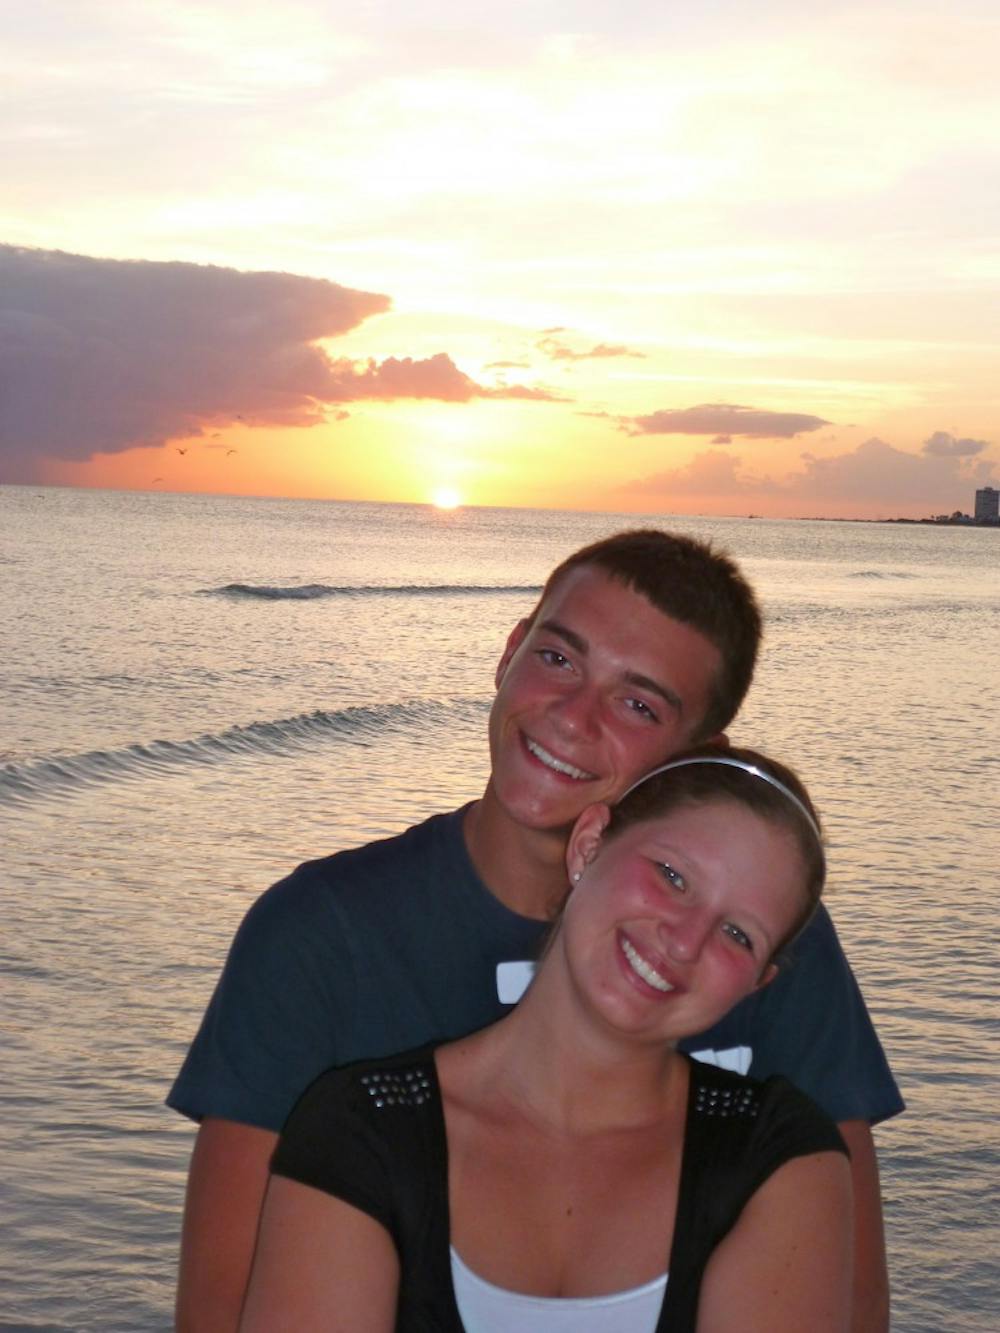 Blake Taylor poses with his girlfriend, Sara Pecina. Taylor died in January 2013 after his car rolled over into a ditch filled with flood water. PHOTO PROVIDED BY SARA PECINA 